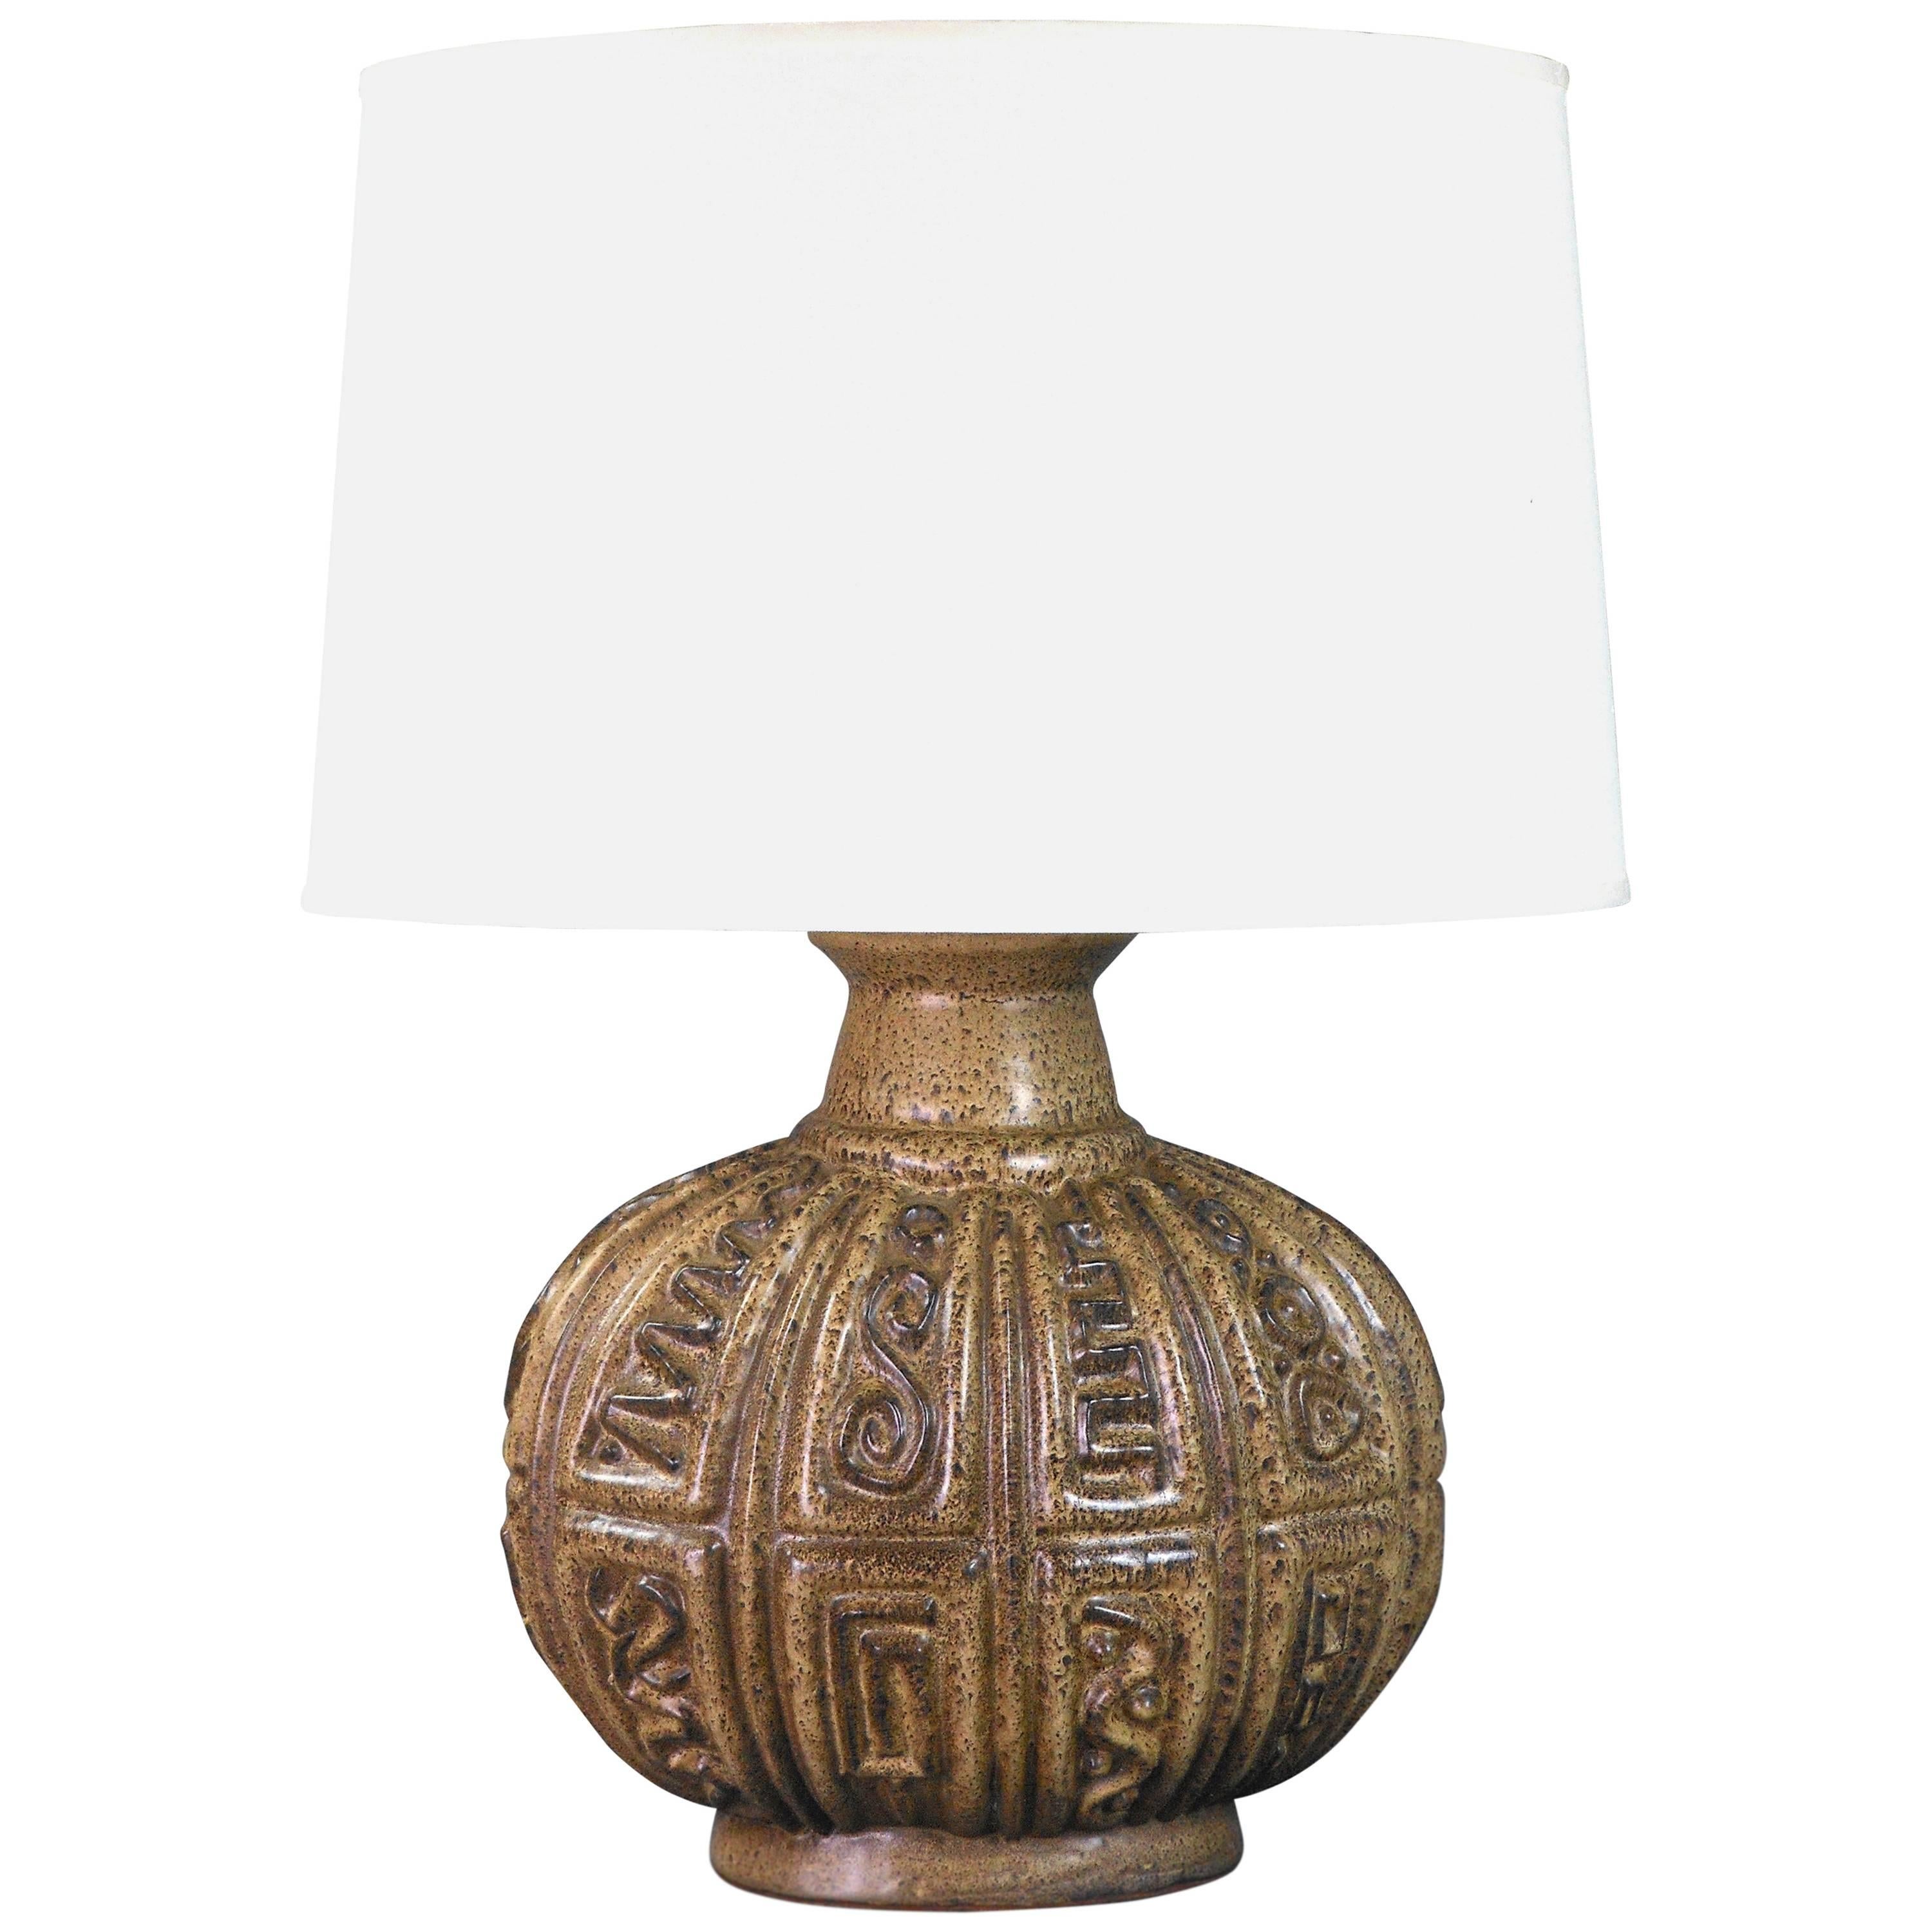 Northern European Ceramic Lamp with Low Relief Geometric Design For Sale